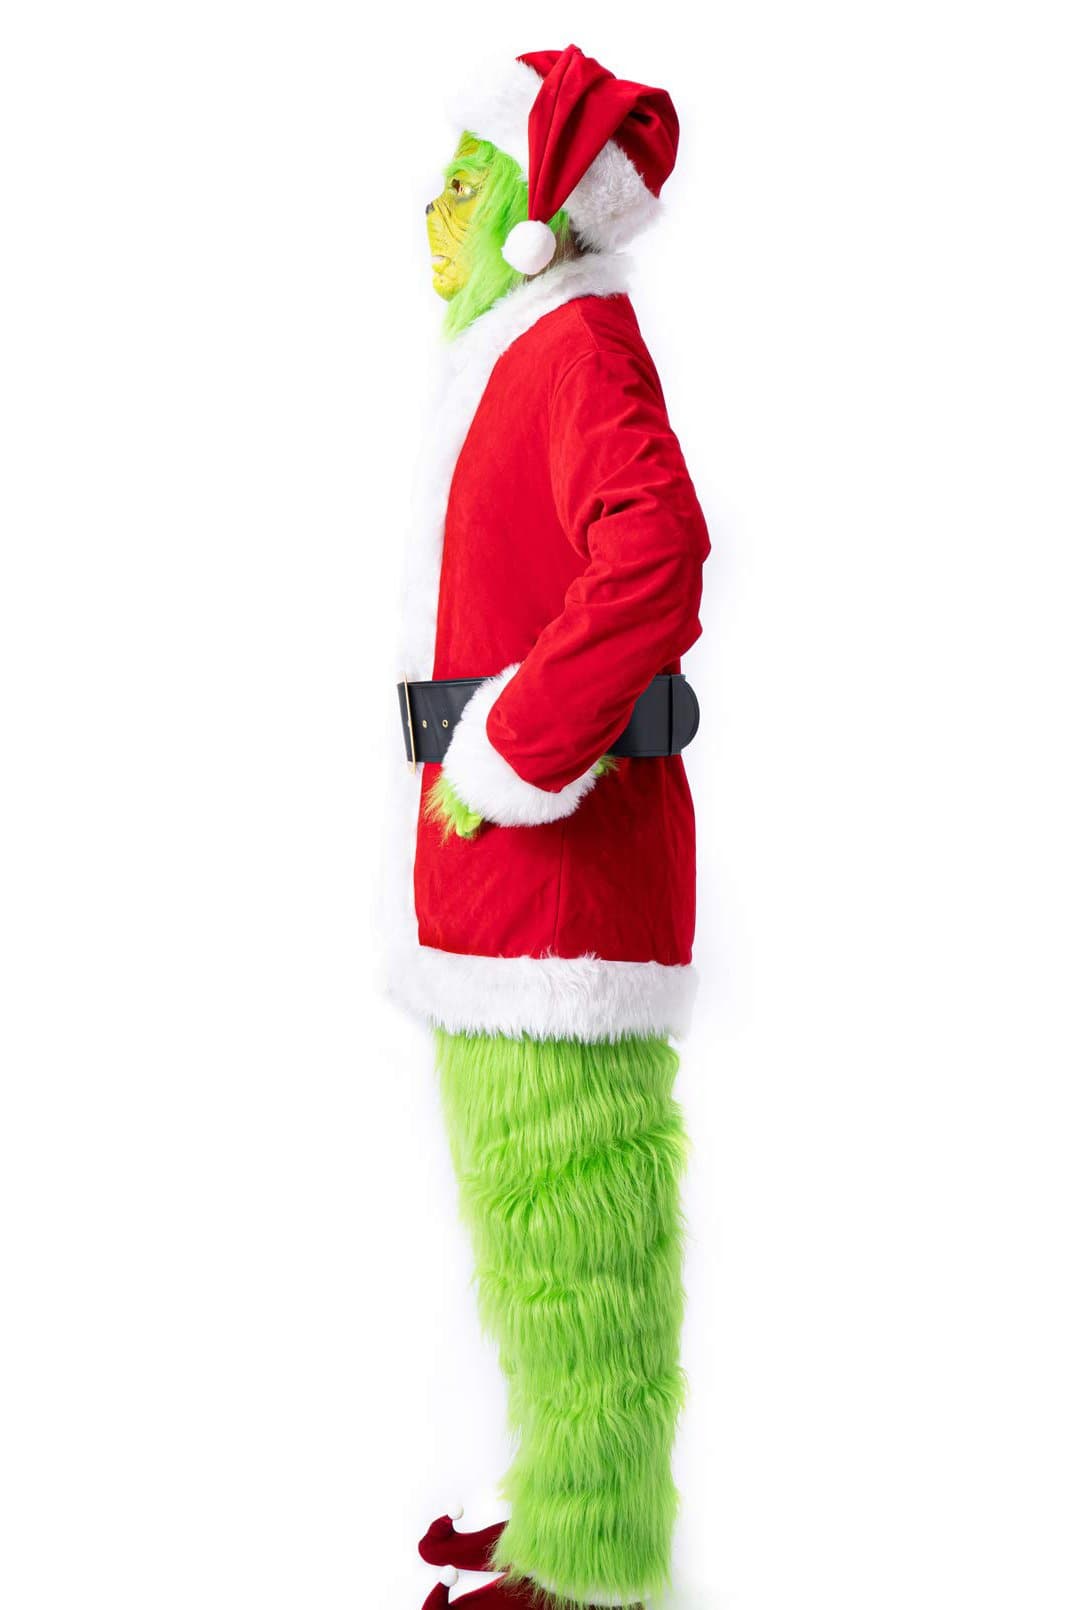 Adult Santa Grinch Costume Outfit For Christmas, Faux Fur.